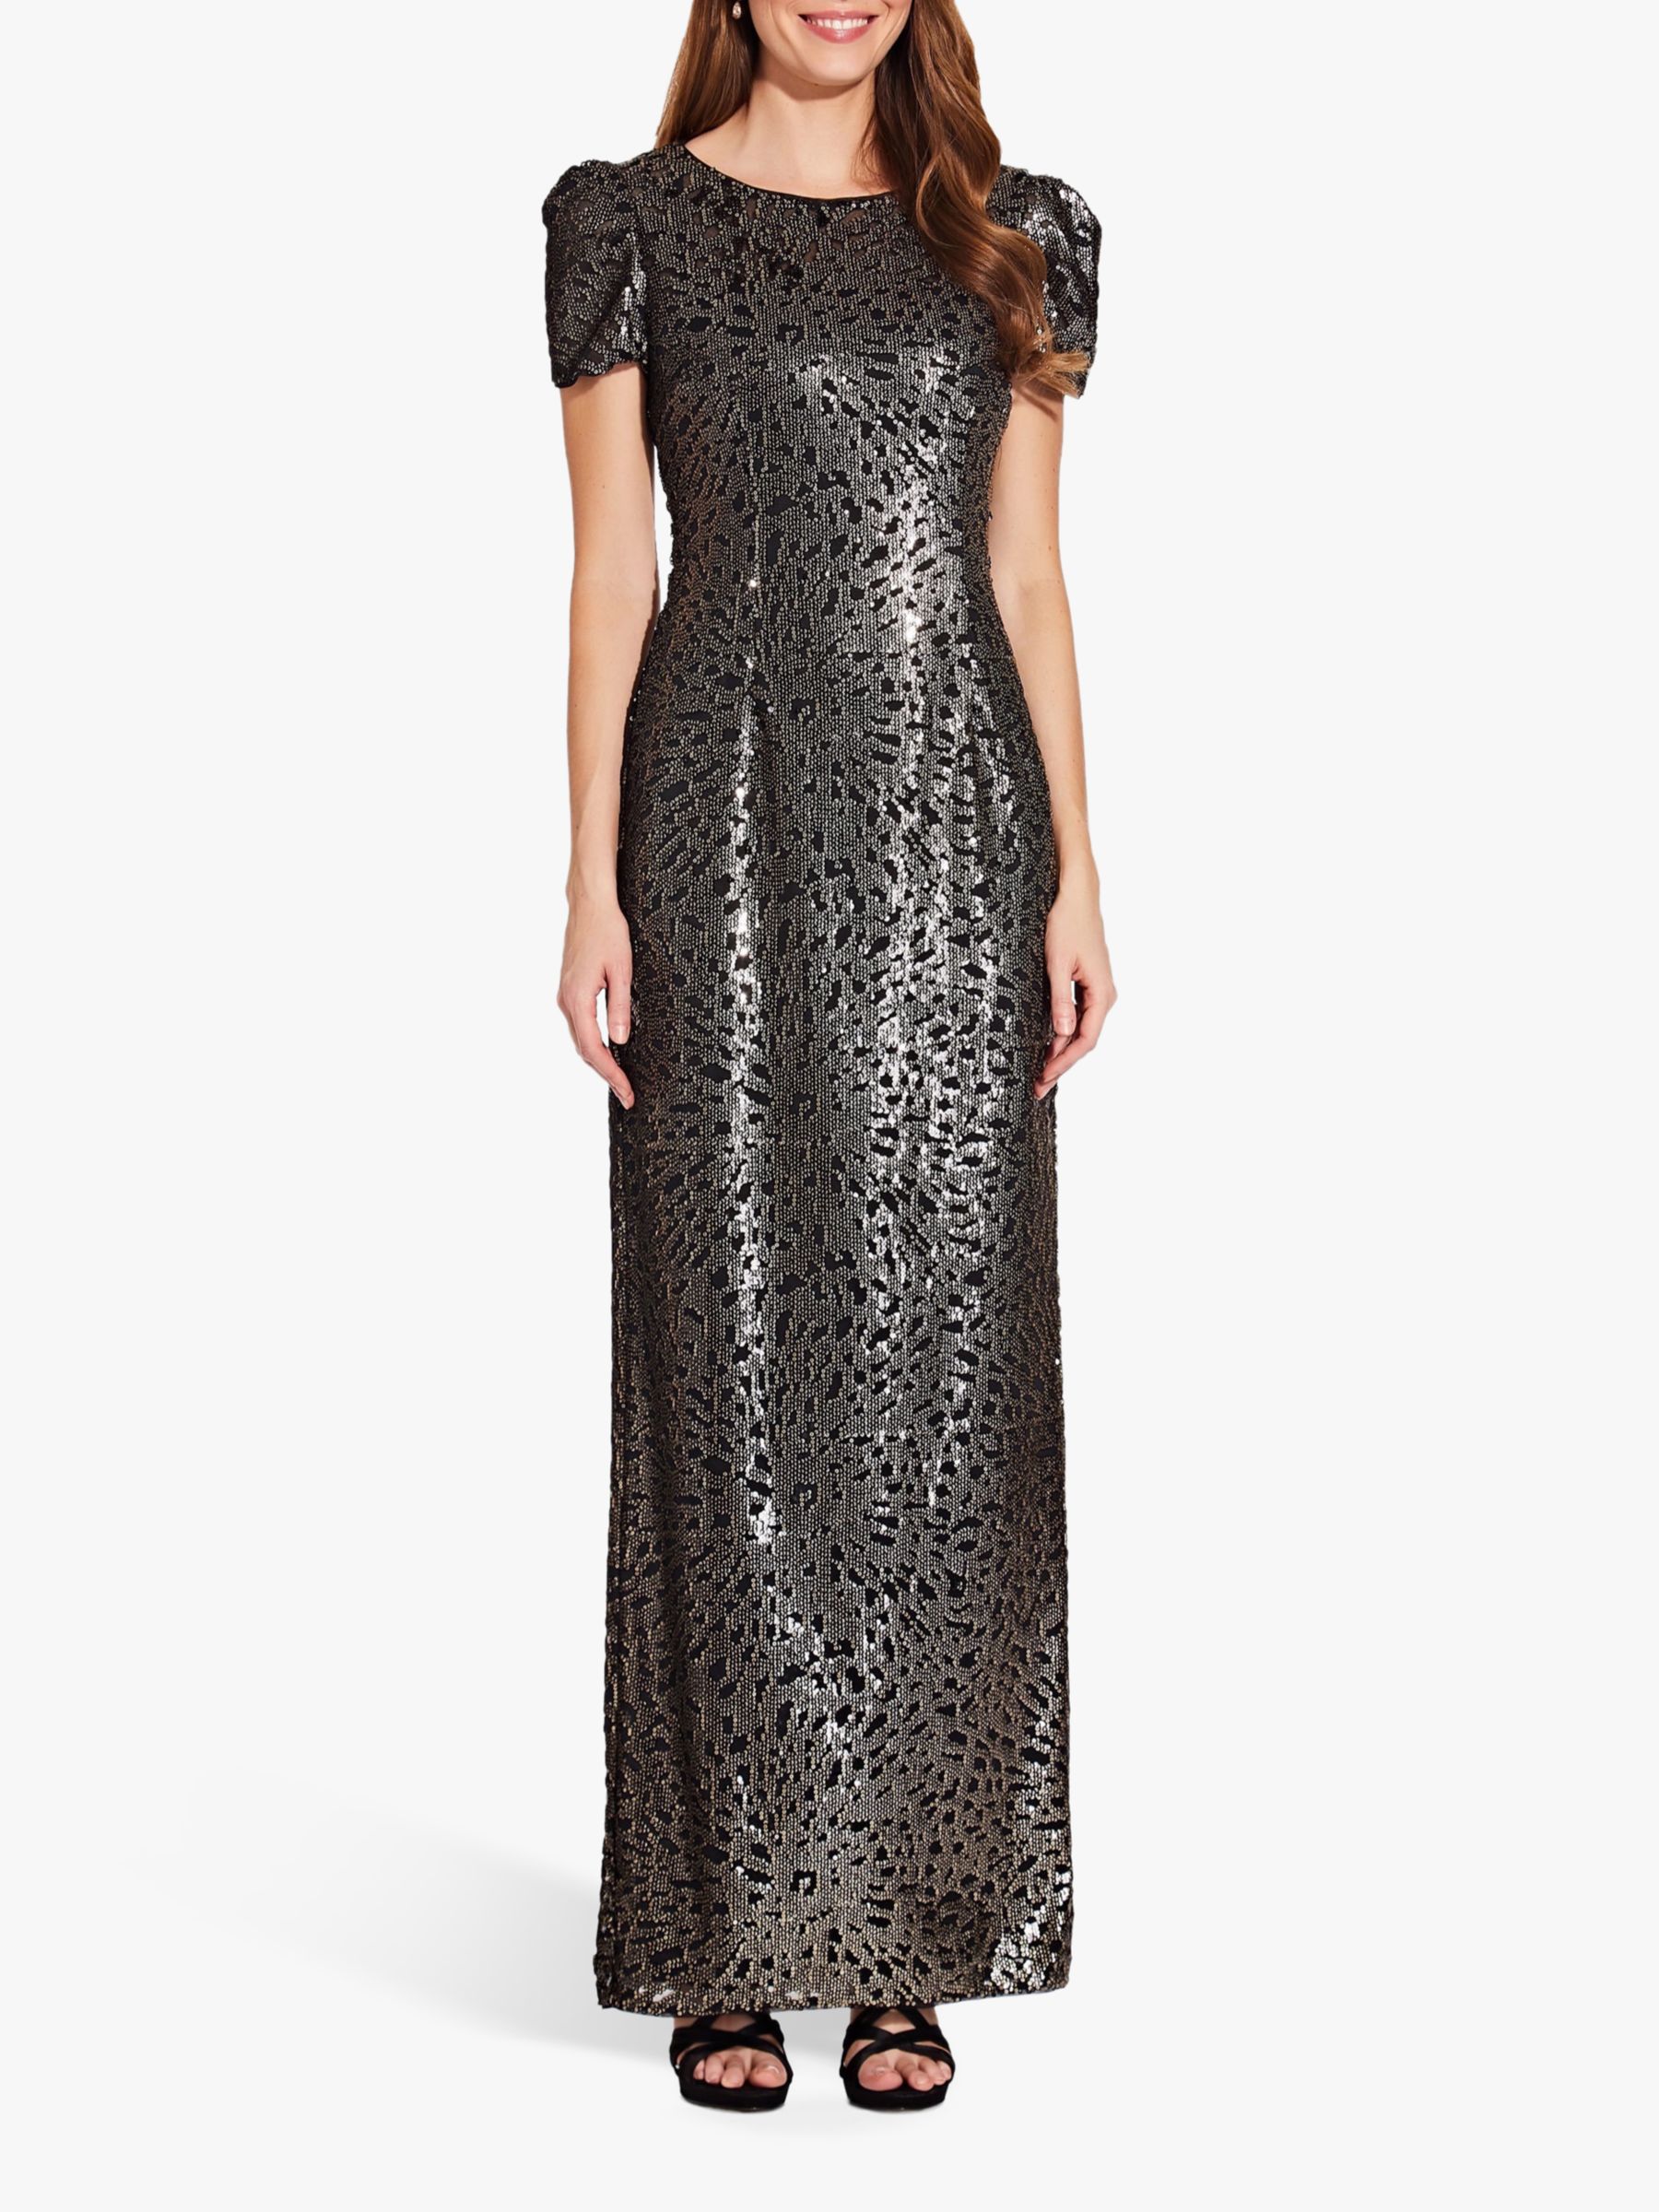 Adrianna Papell Long Sequin Dress with ...